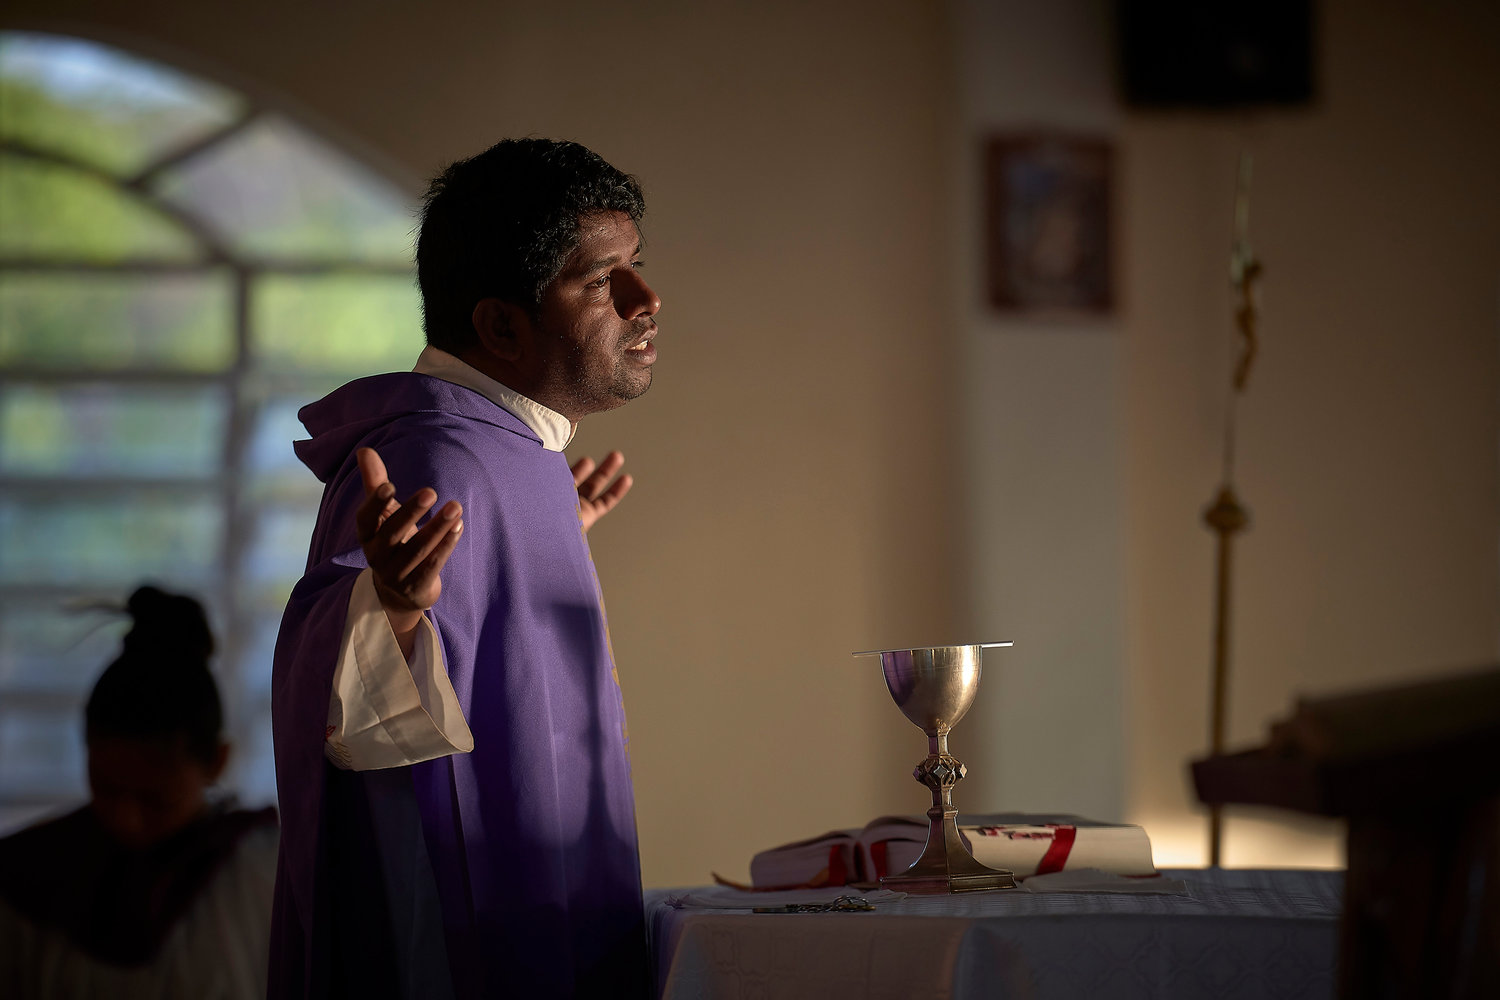 Father Edwin Anthony, a Jesuit missionary from India, celebrates Mass in St. Ignatius, Guyana, April 6, 2019. In Pope Francis’ postsynodal apostolic exhortation, “Querida Amazonia,” released Feb. 12, 2020, the Pontiff acknowledged the serious shortage of priests in remote areas of the Amazon, but he insisted not all avenues have been exhausted to address the issue.